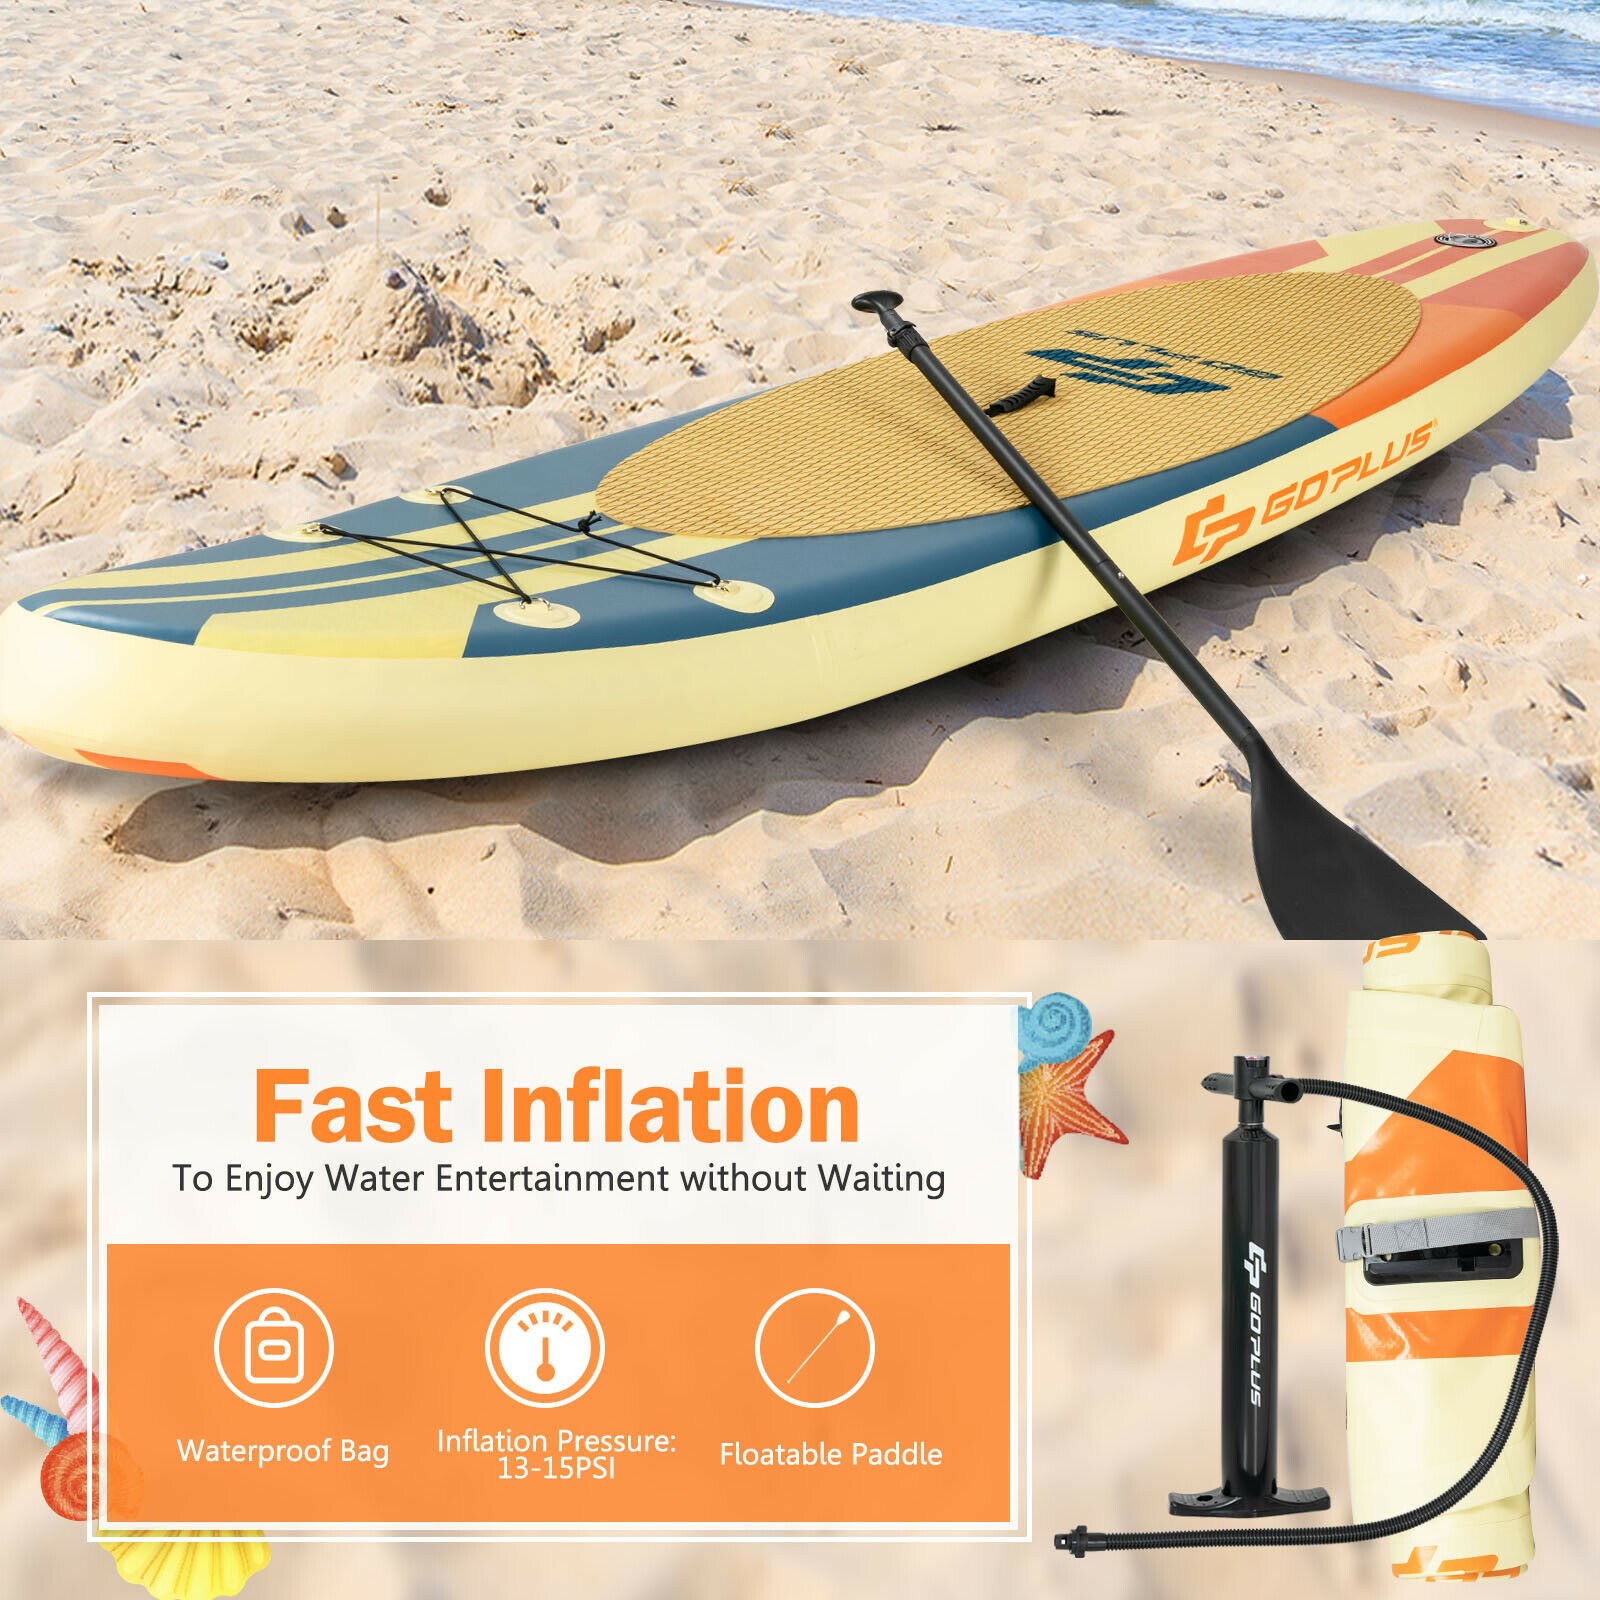 Goplus 10' Inflatable Stand Up Paddle Board Surfboard W/Bag Aluminum Paddle Pump